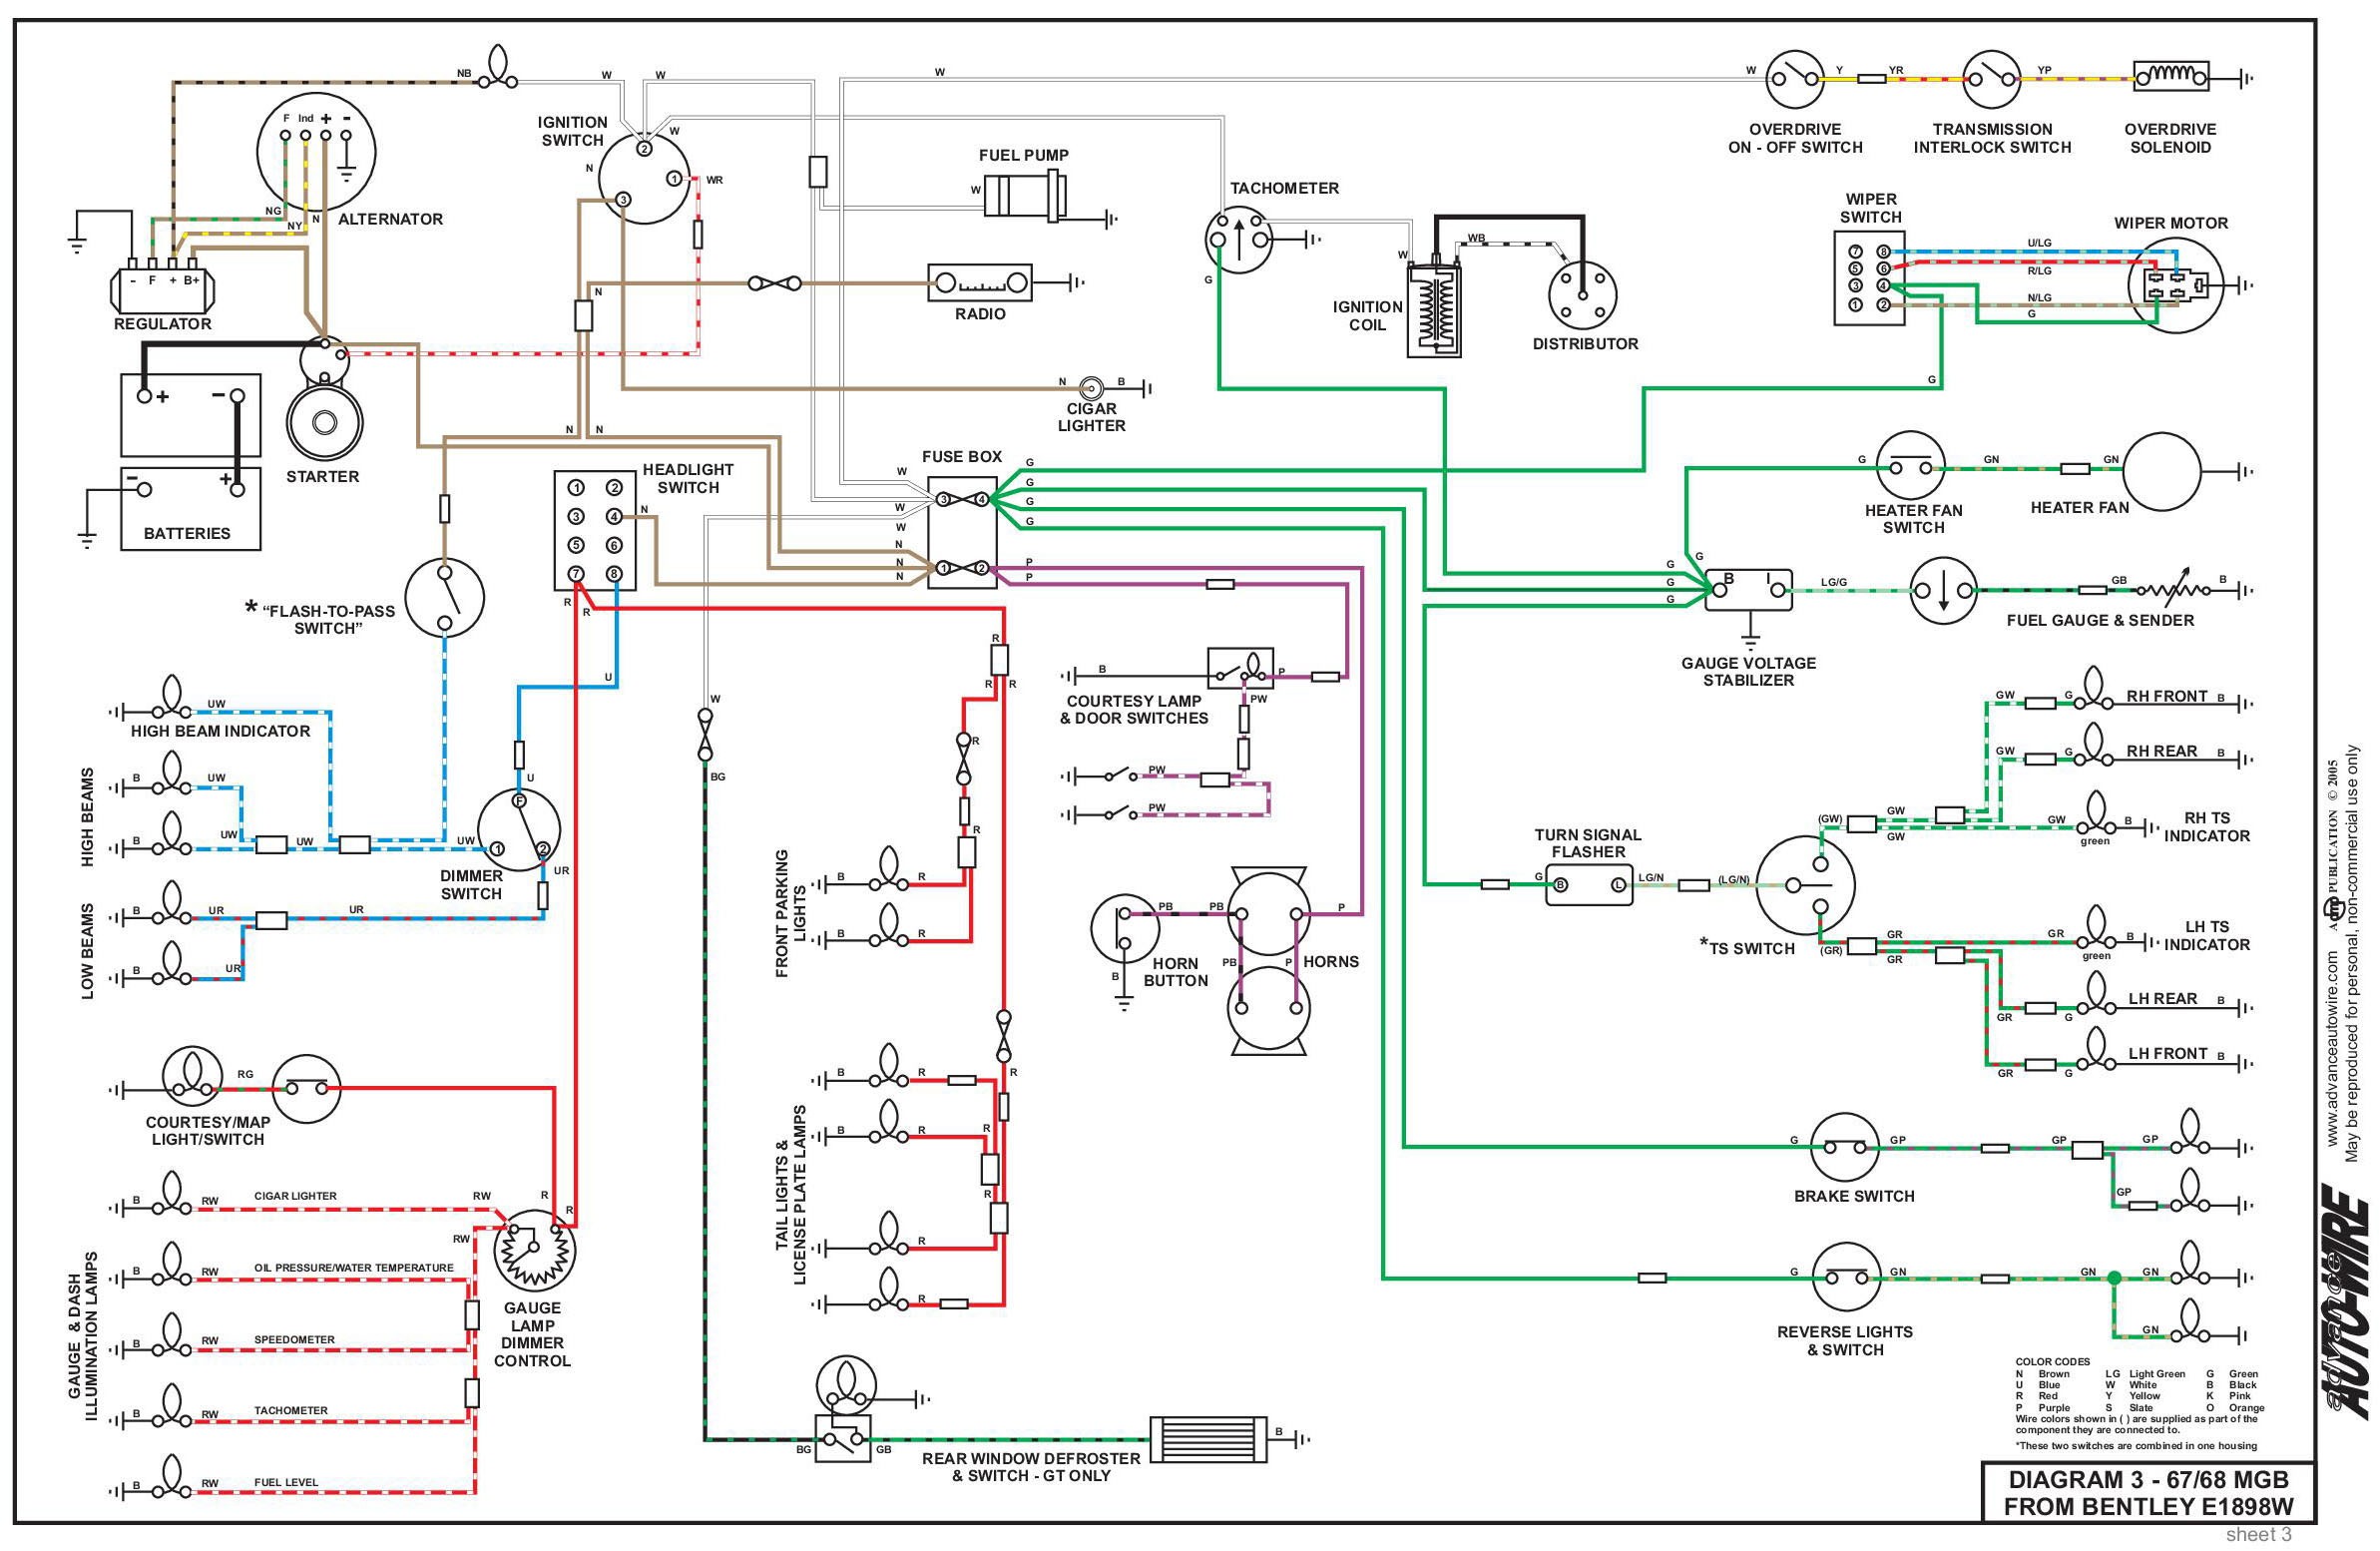 Wiring Diagram 3 Wire Turn Signal Flasher with Buzzar Electrical System